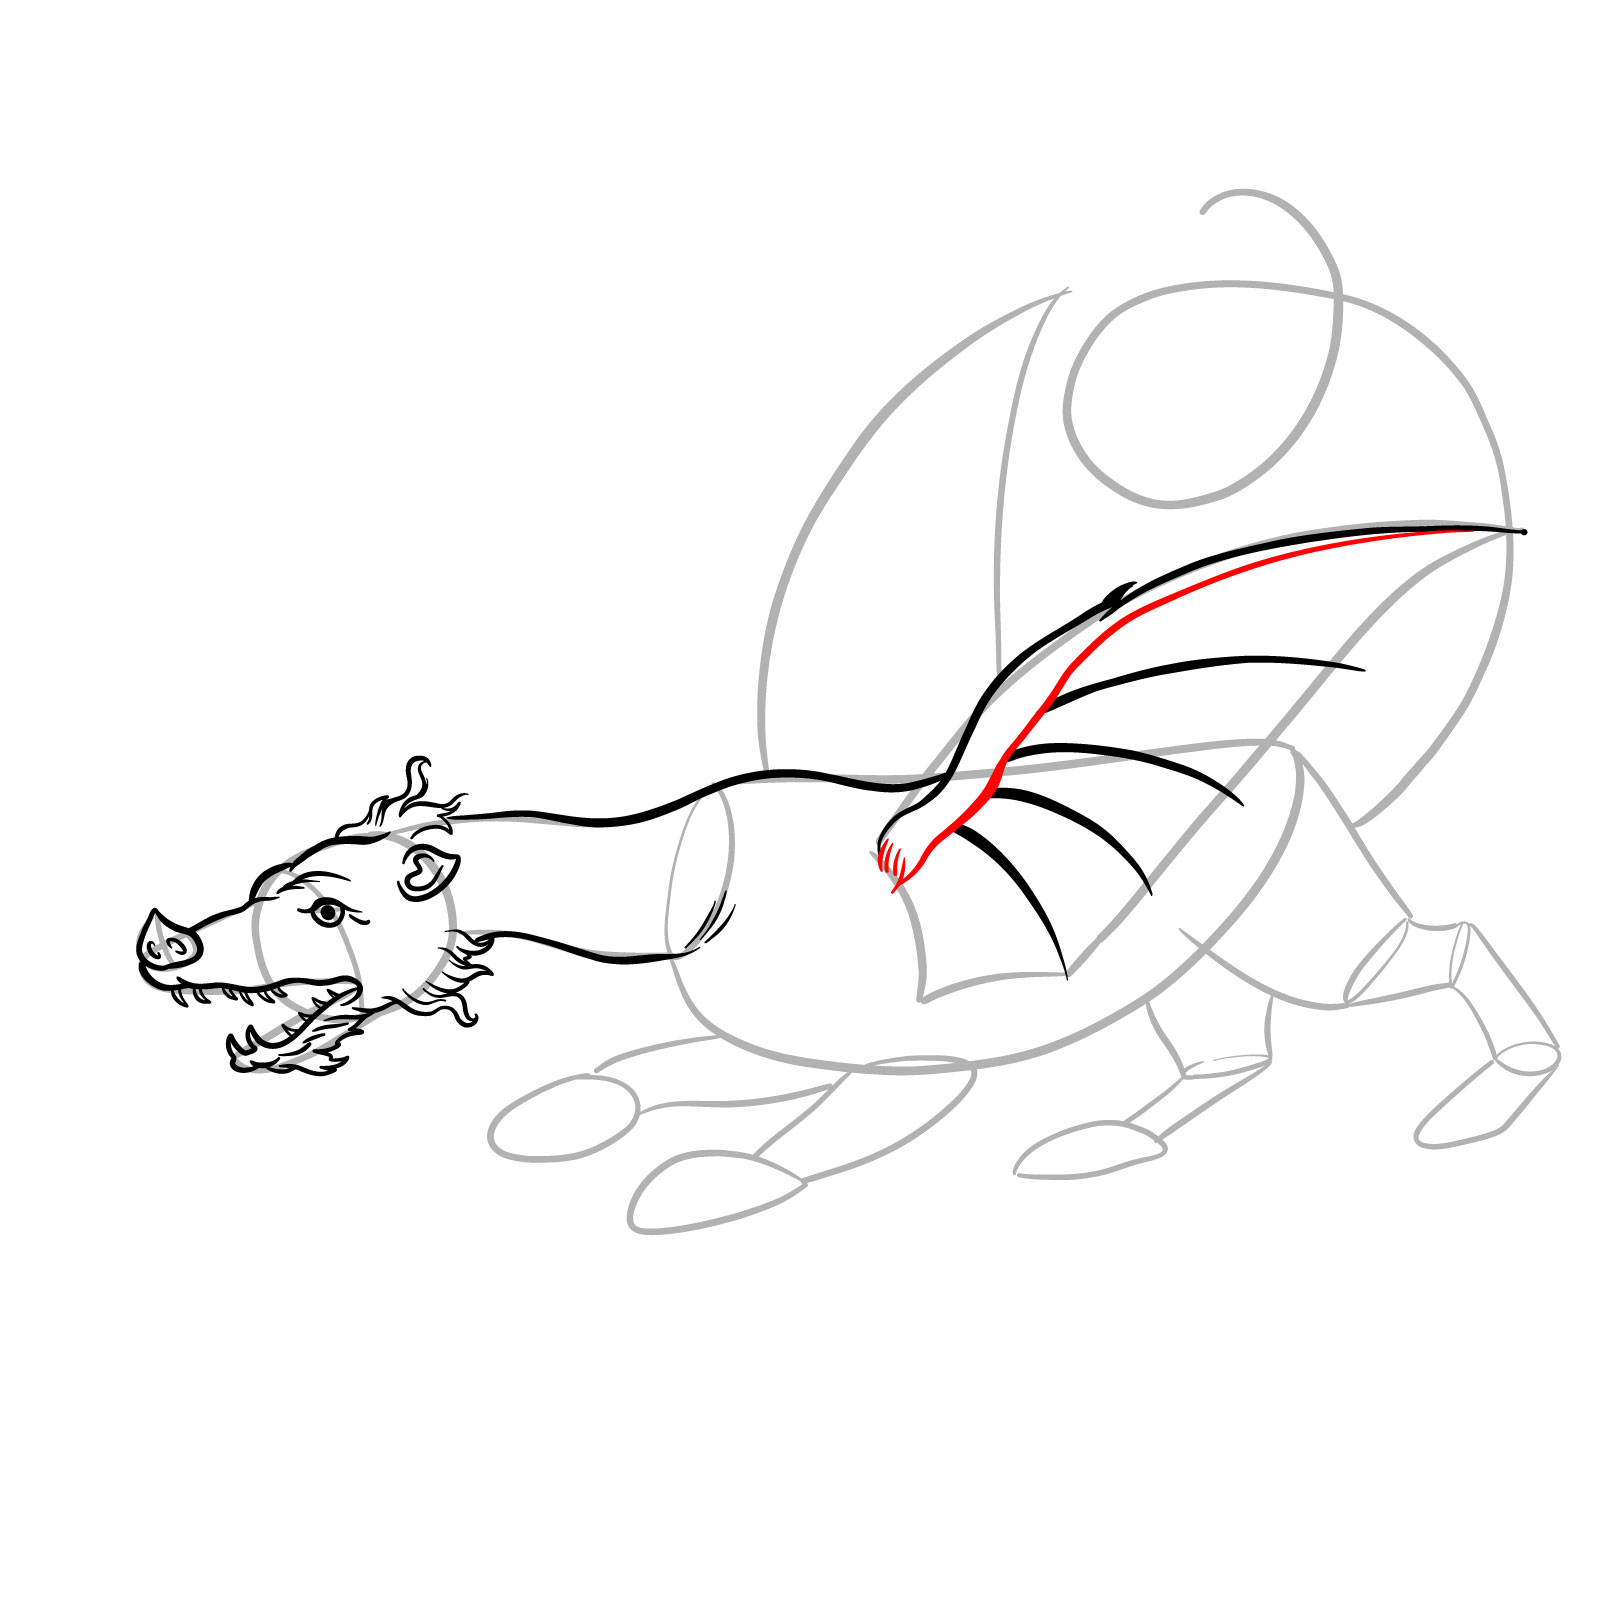 How to draw a classic European dragon - step 18